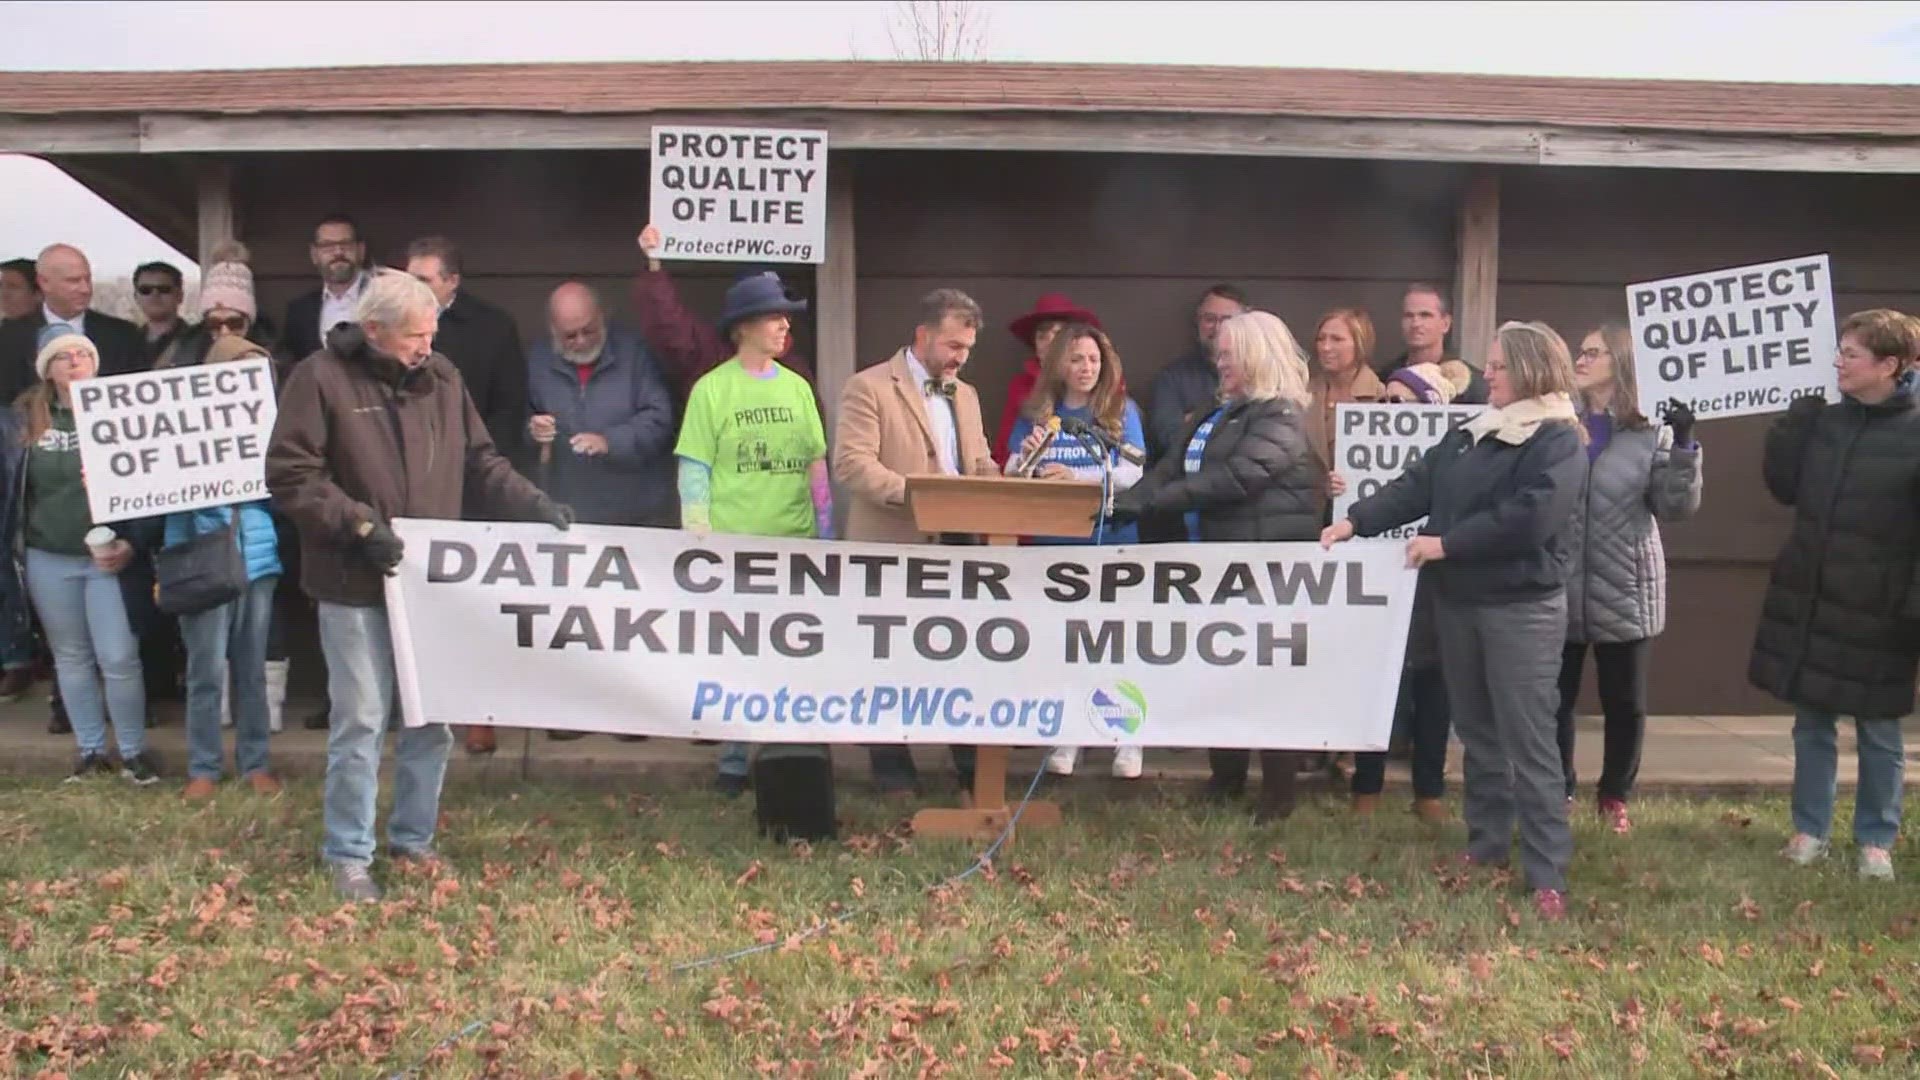 Prince William County residents took the county to court once again today, to stop a data center project. This time, they're trying to prevent the Digital Gateway.